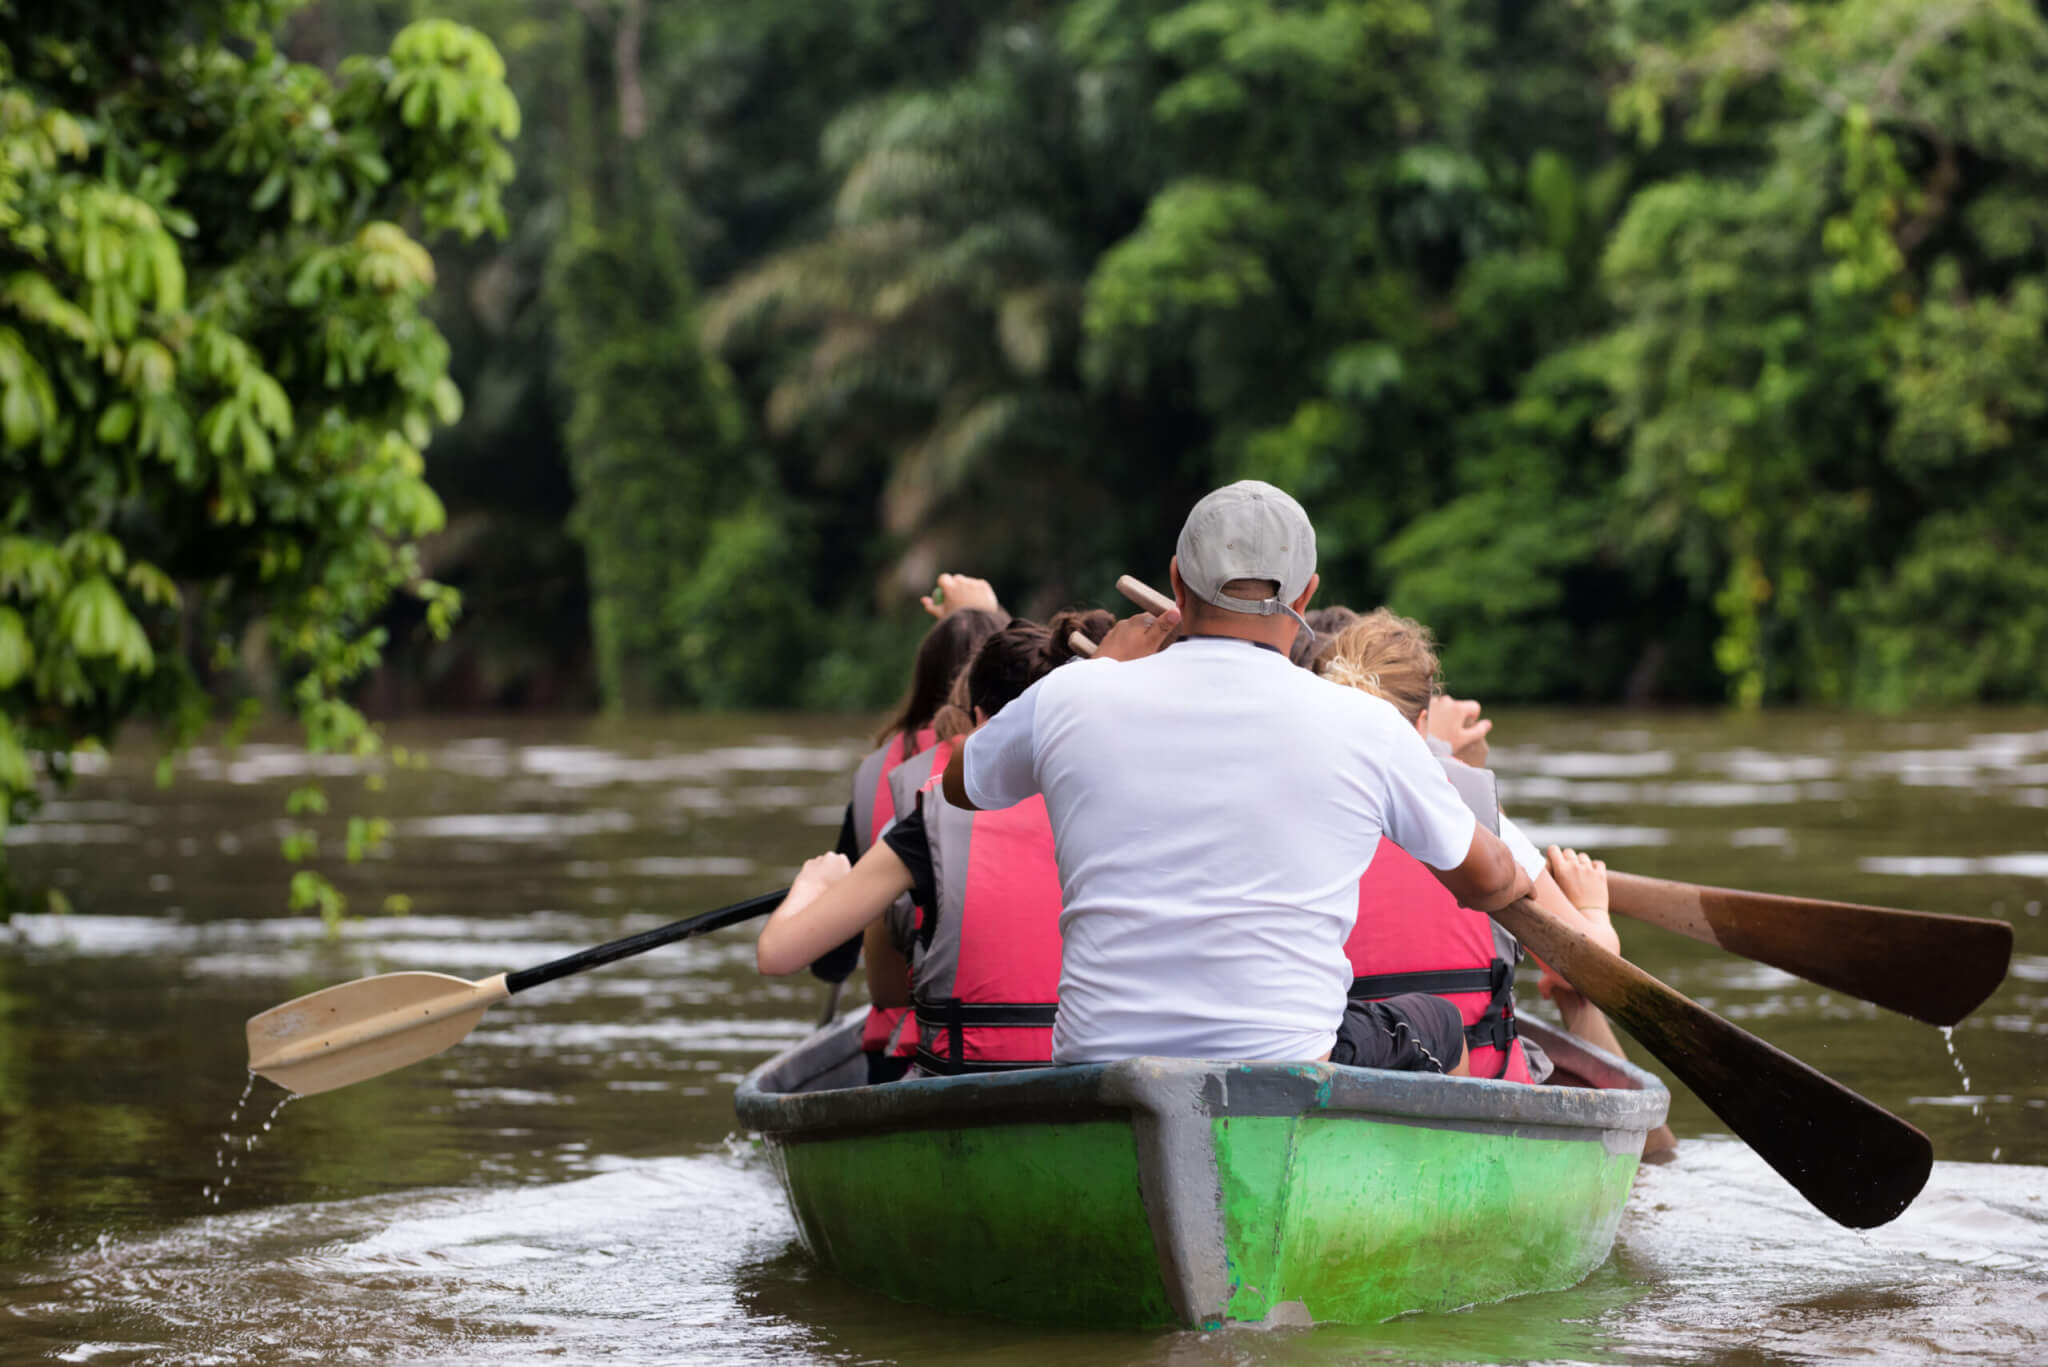 People exploring a wild nature area by rowing boat. Ecotourism concept. Tortuguero national park. Costa Rica.